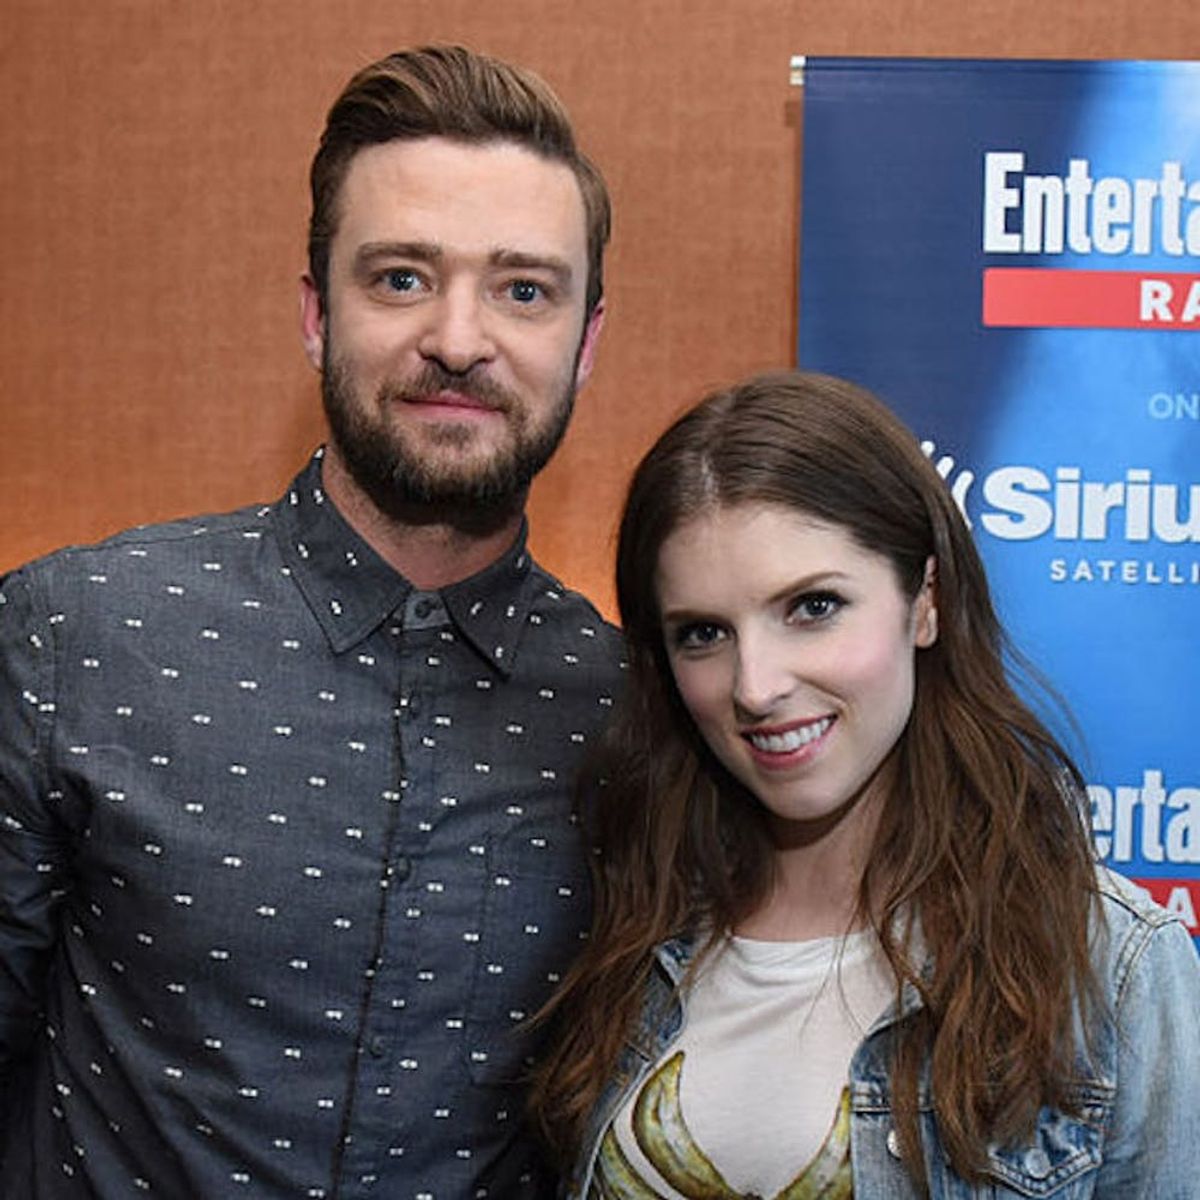 Anna Kendrick and Justin Timberlake Are the Dream Team We Never Knew We Needed